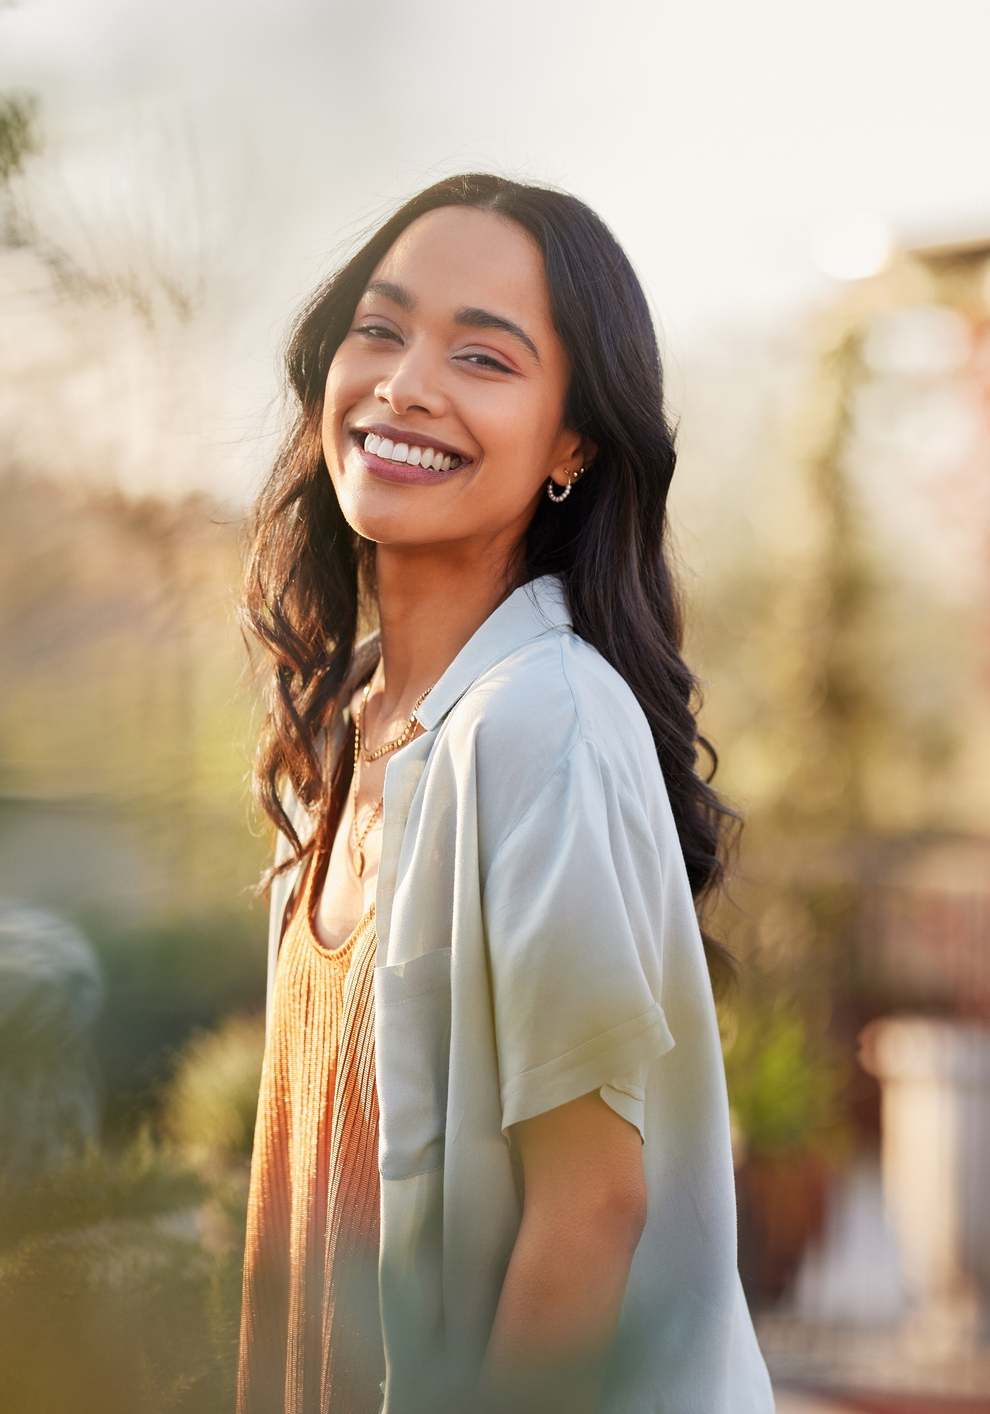 Young latin woman in casual clothing in the garden looking at camera, during early morning. Portrait of healthy mexican girl enjoying nature during sunset. Mindful multiethnic woman enjoy morning ritual with fresh air.